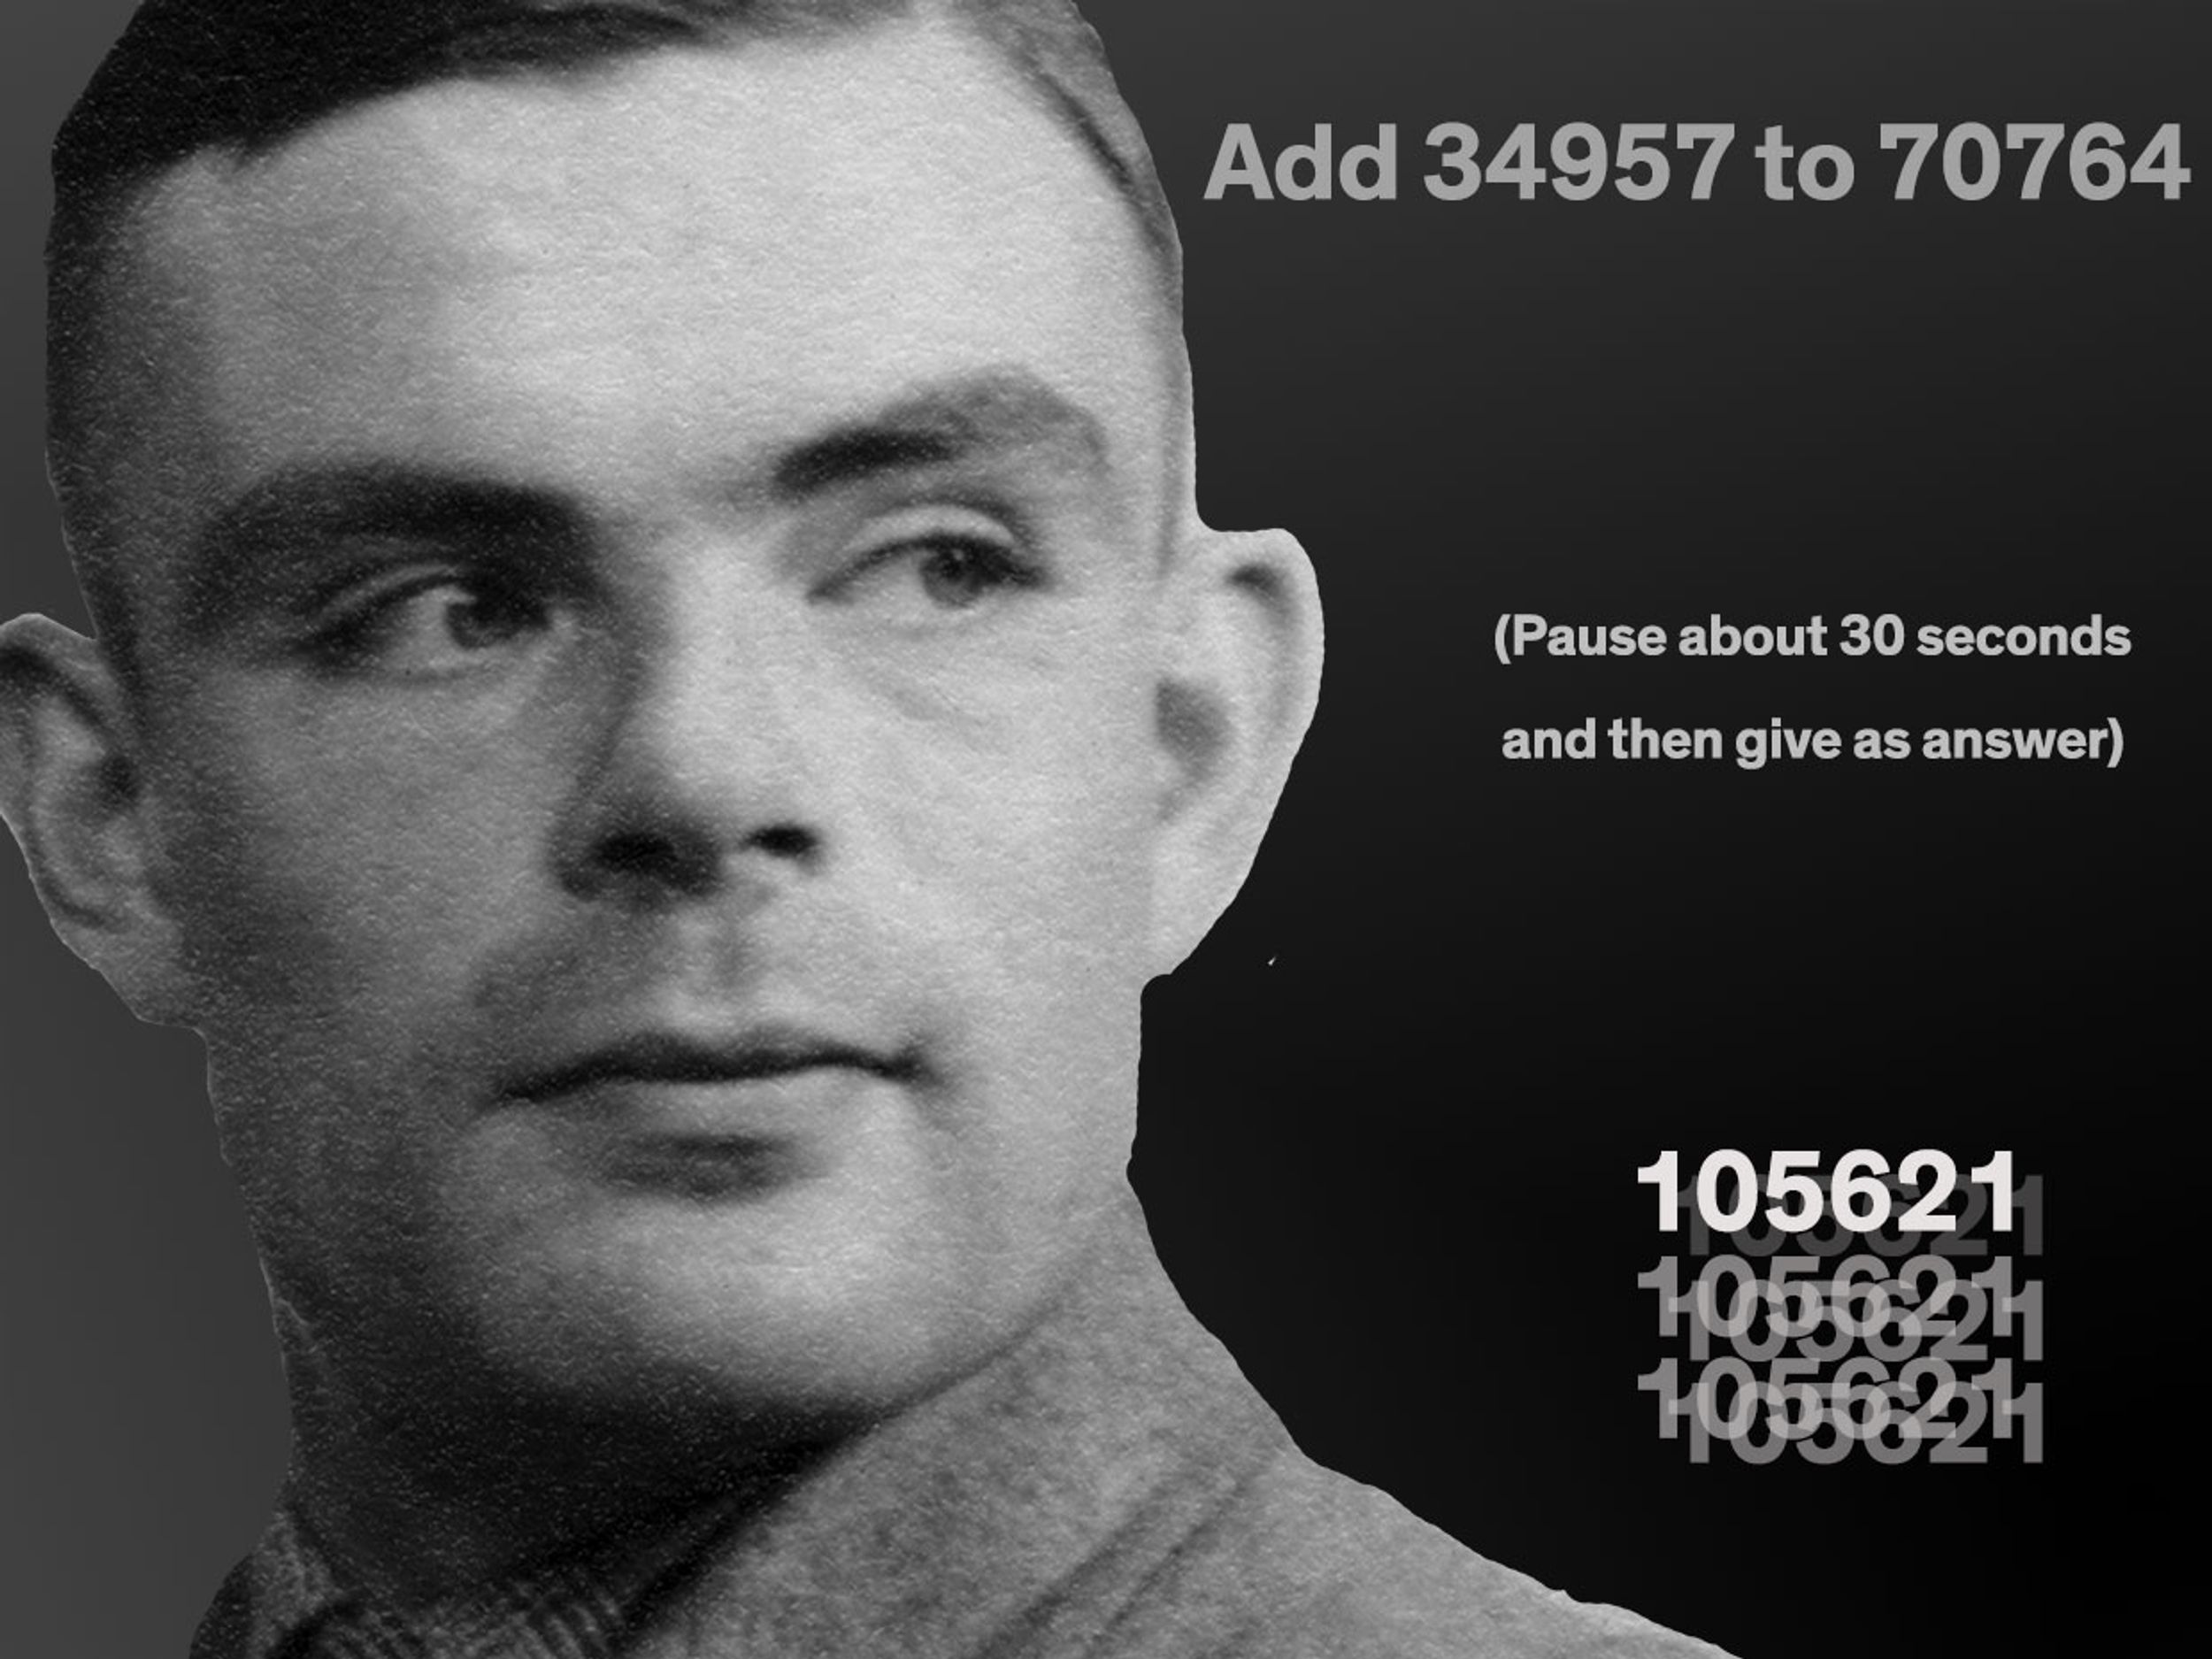 Photograph of Alan Turing with the words Add 34957 to 70764, (Pause about 30 seconds and then give as answer), 105621.